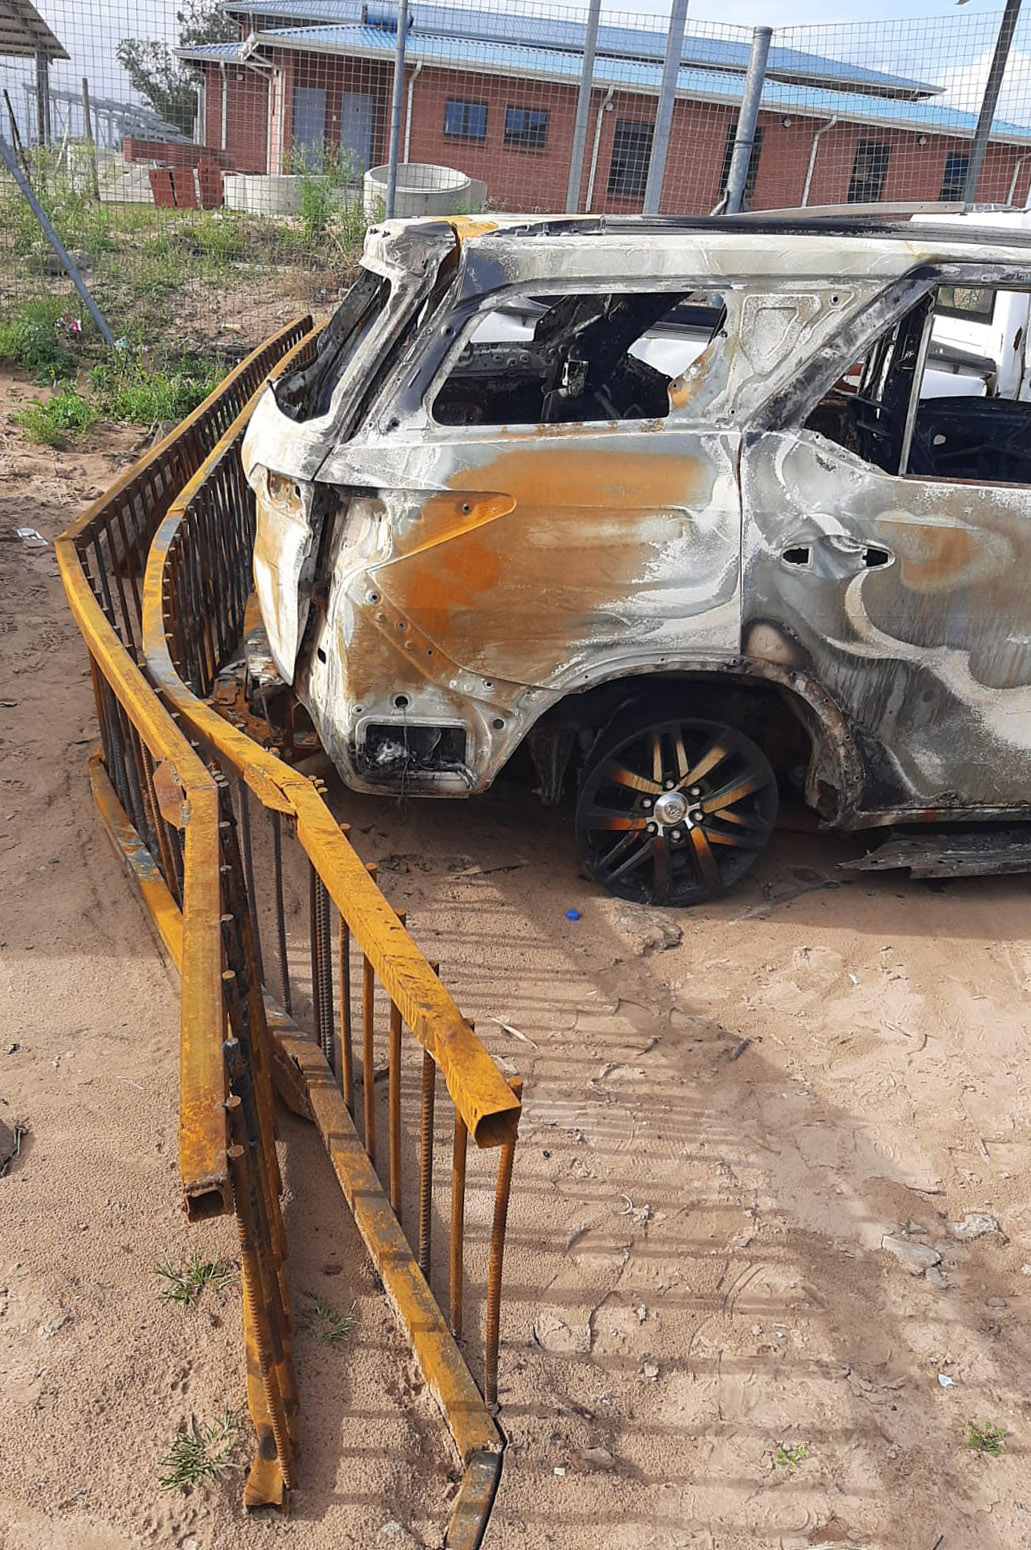 Read more about the article Mozambican Government Outraged by Repeated Attacks on Mozambican-Registered Cars in South Africa | The African Exponent.